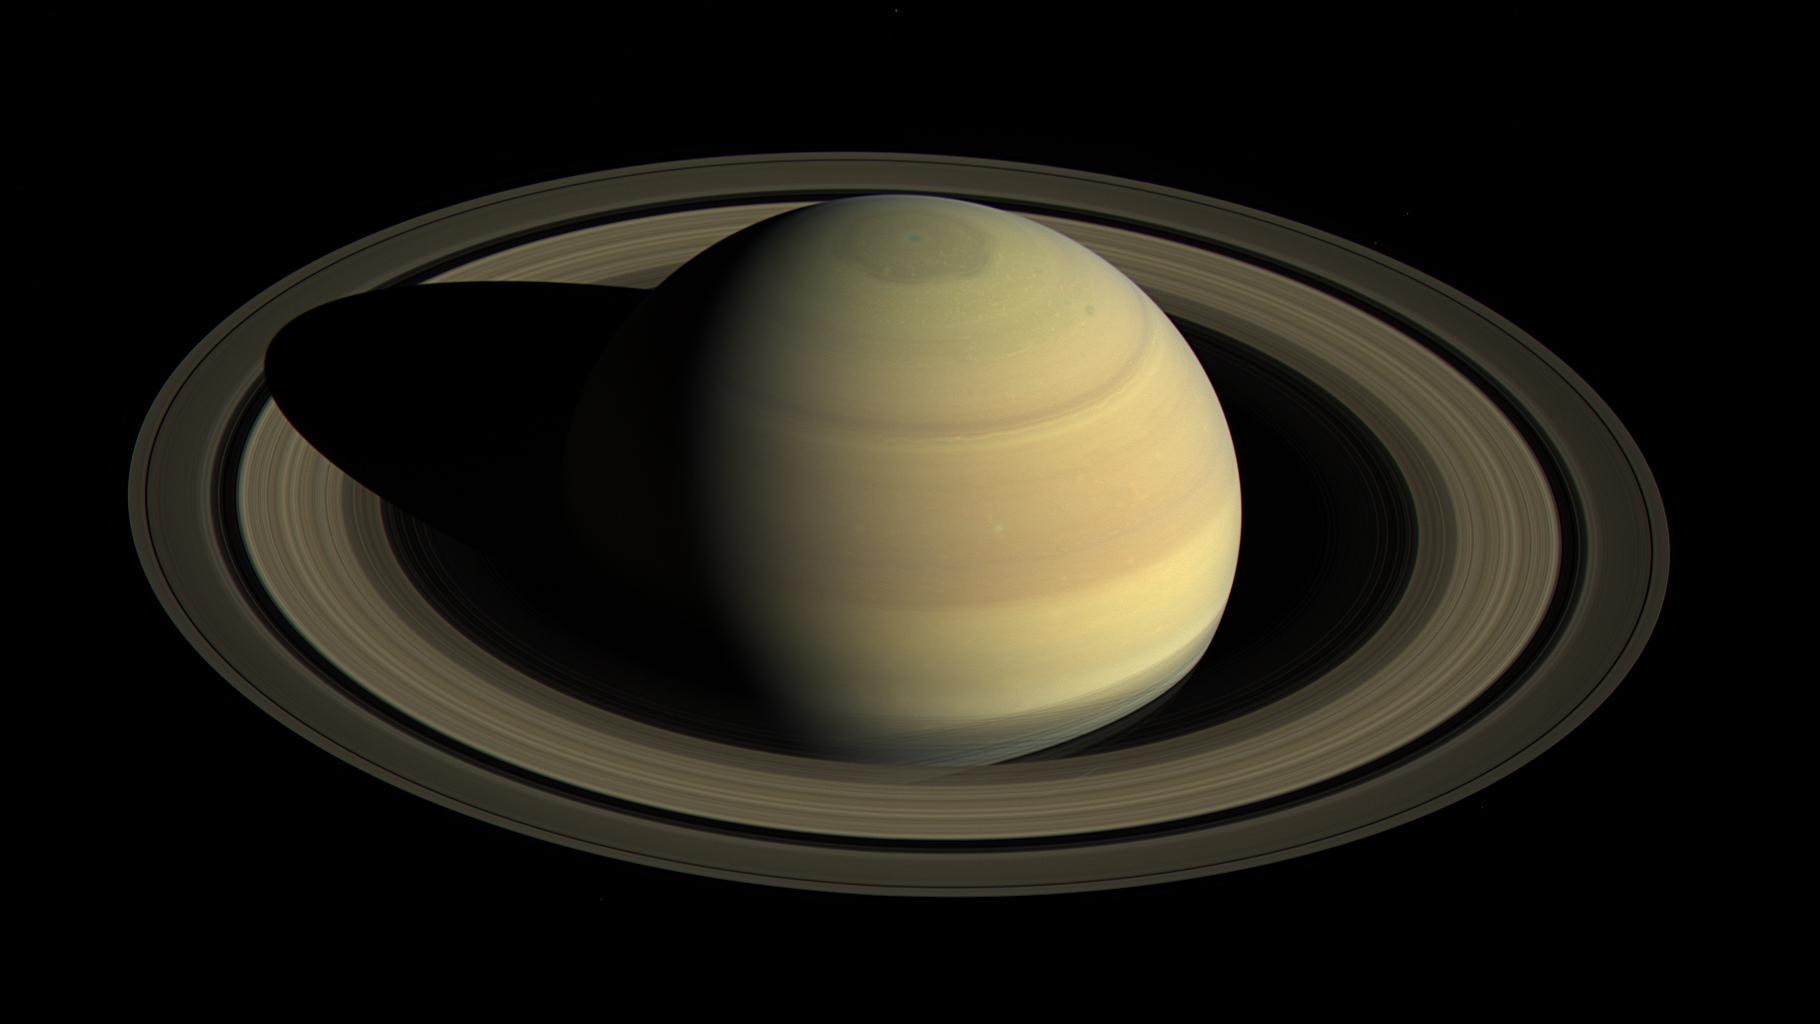 Saturn - as research object and aesthetic eye-catcher